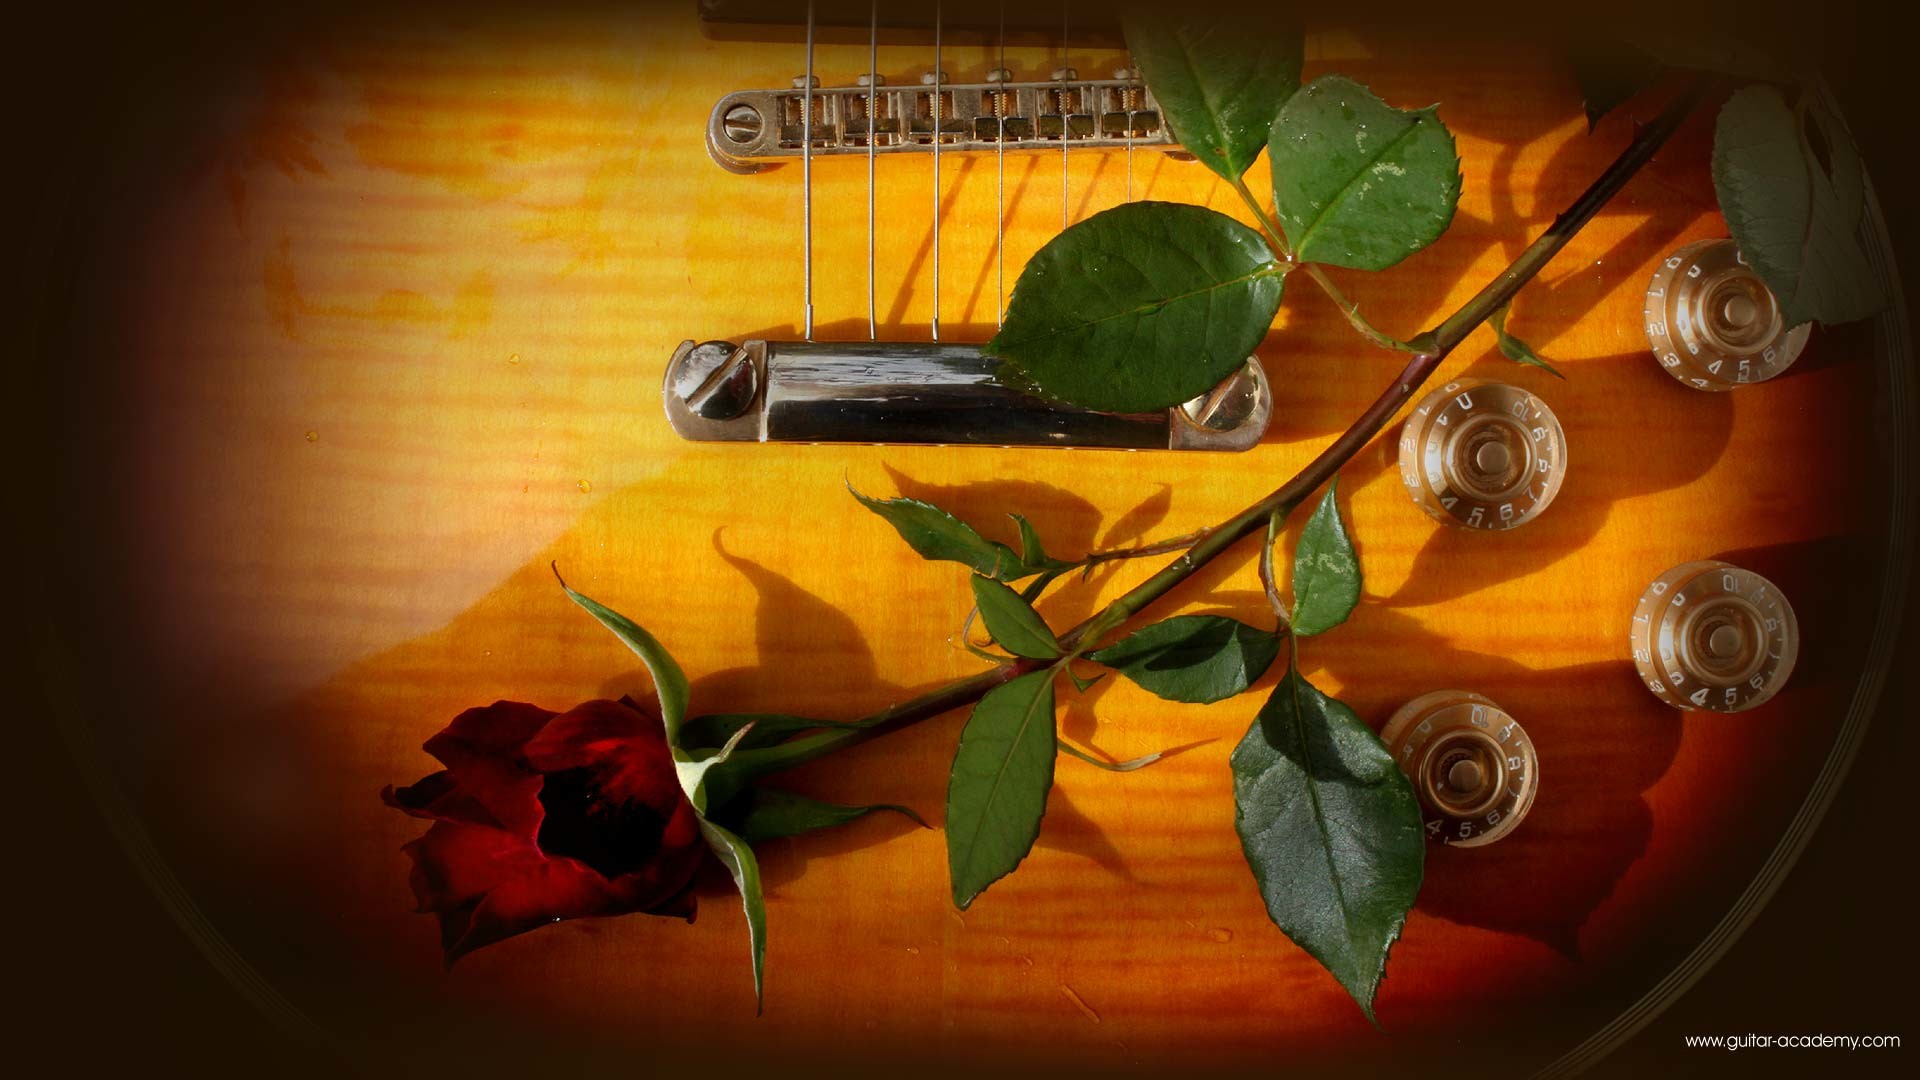 1920x1080 Guitar wallpaper, romantic looking Gibson Les Paul and red rose